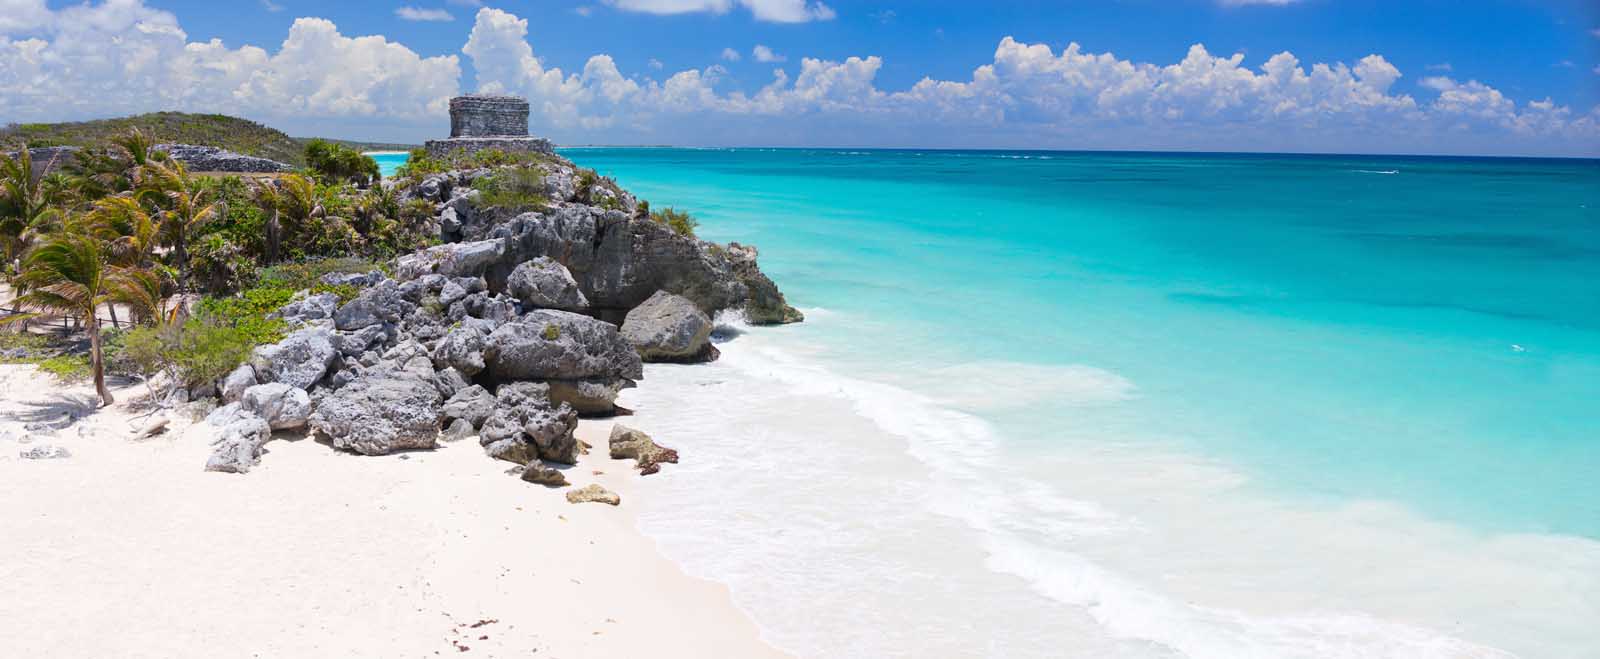 best things to do in tulum mexico mayan ruins